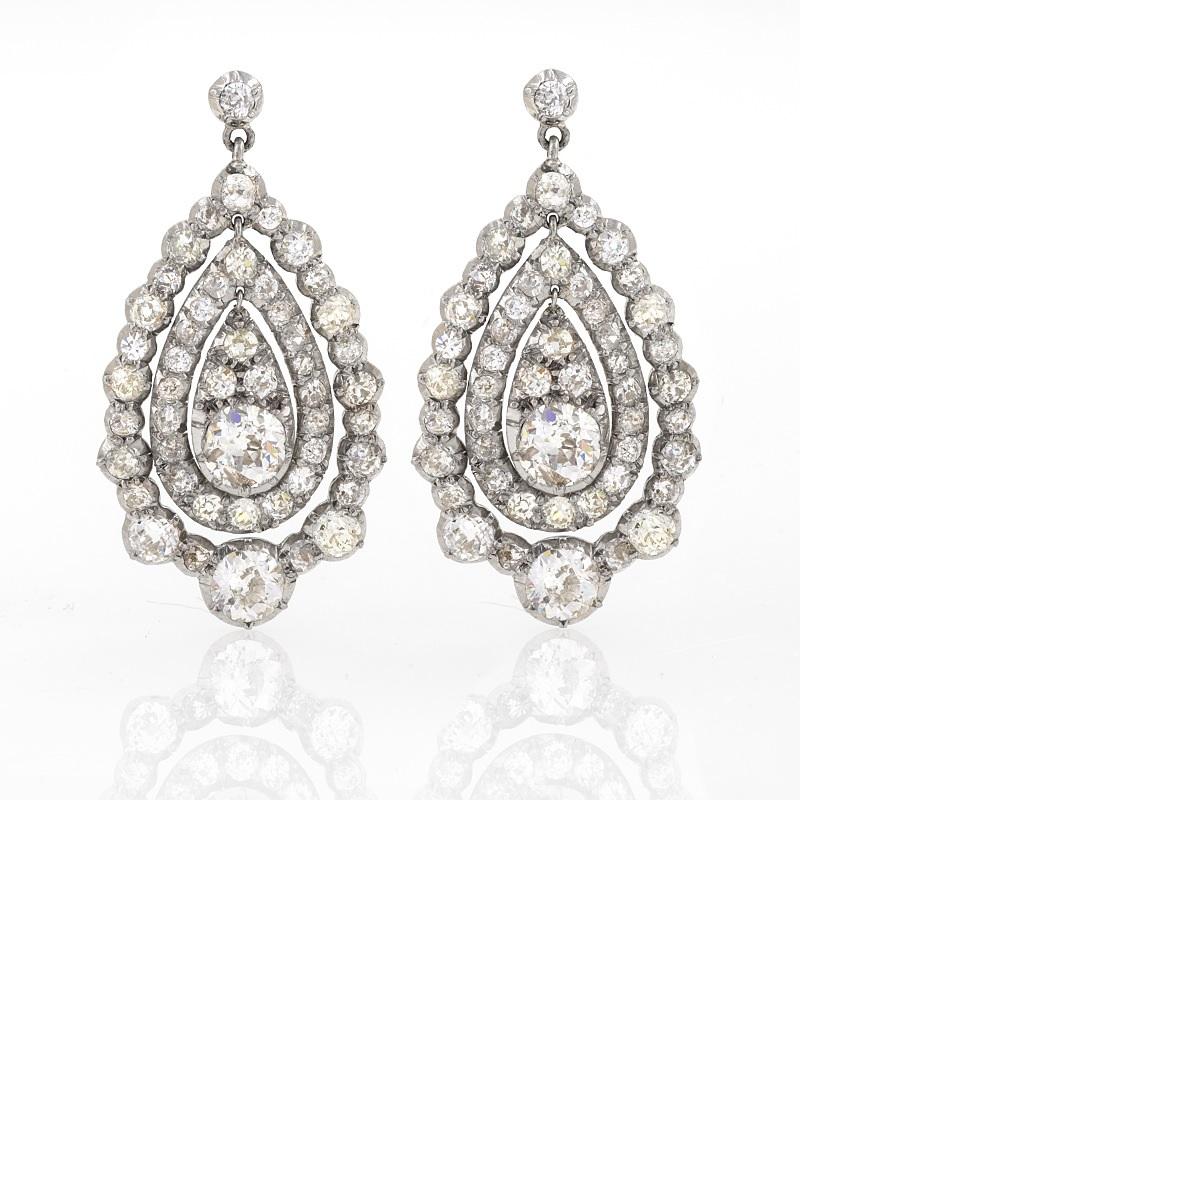 A pair of antique silver-top/18 karat gold rhodium plated earrings with diamonds. The earrings have 96 Old European-cut diamonds with an approximate total weight of 8.70 carats, (including large diamonds, approximate weight .75 carat each), H/I/J